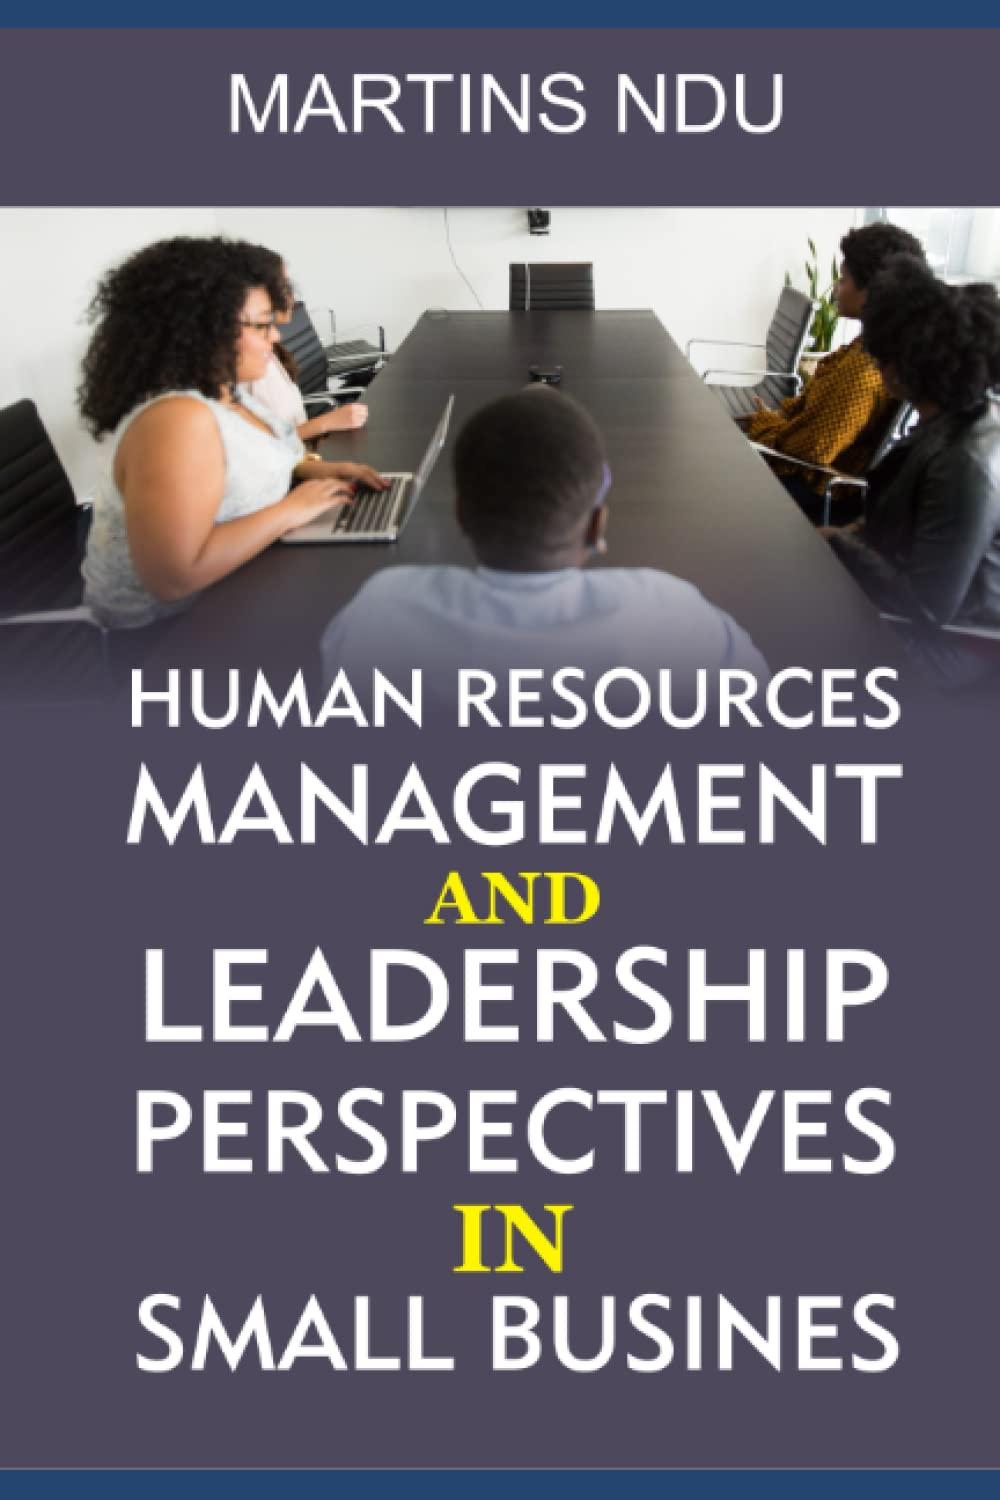 human resources management and leadership perspectives in small business 1st edition martins ndu b0b45dxjkh,